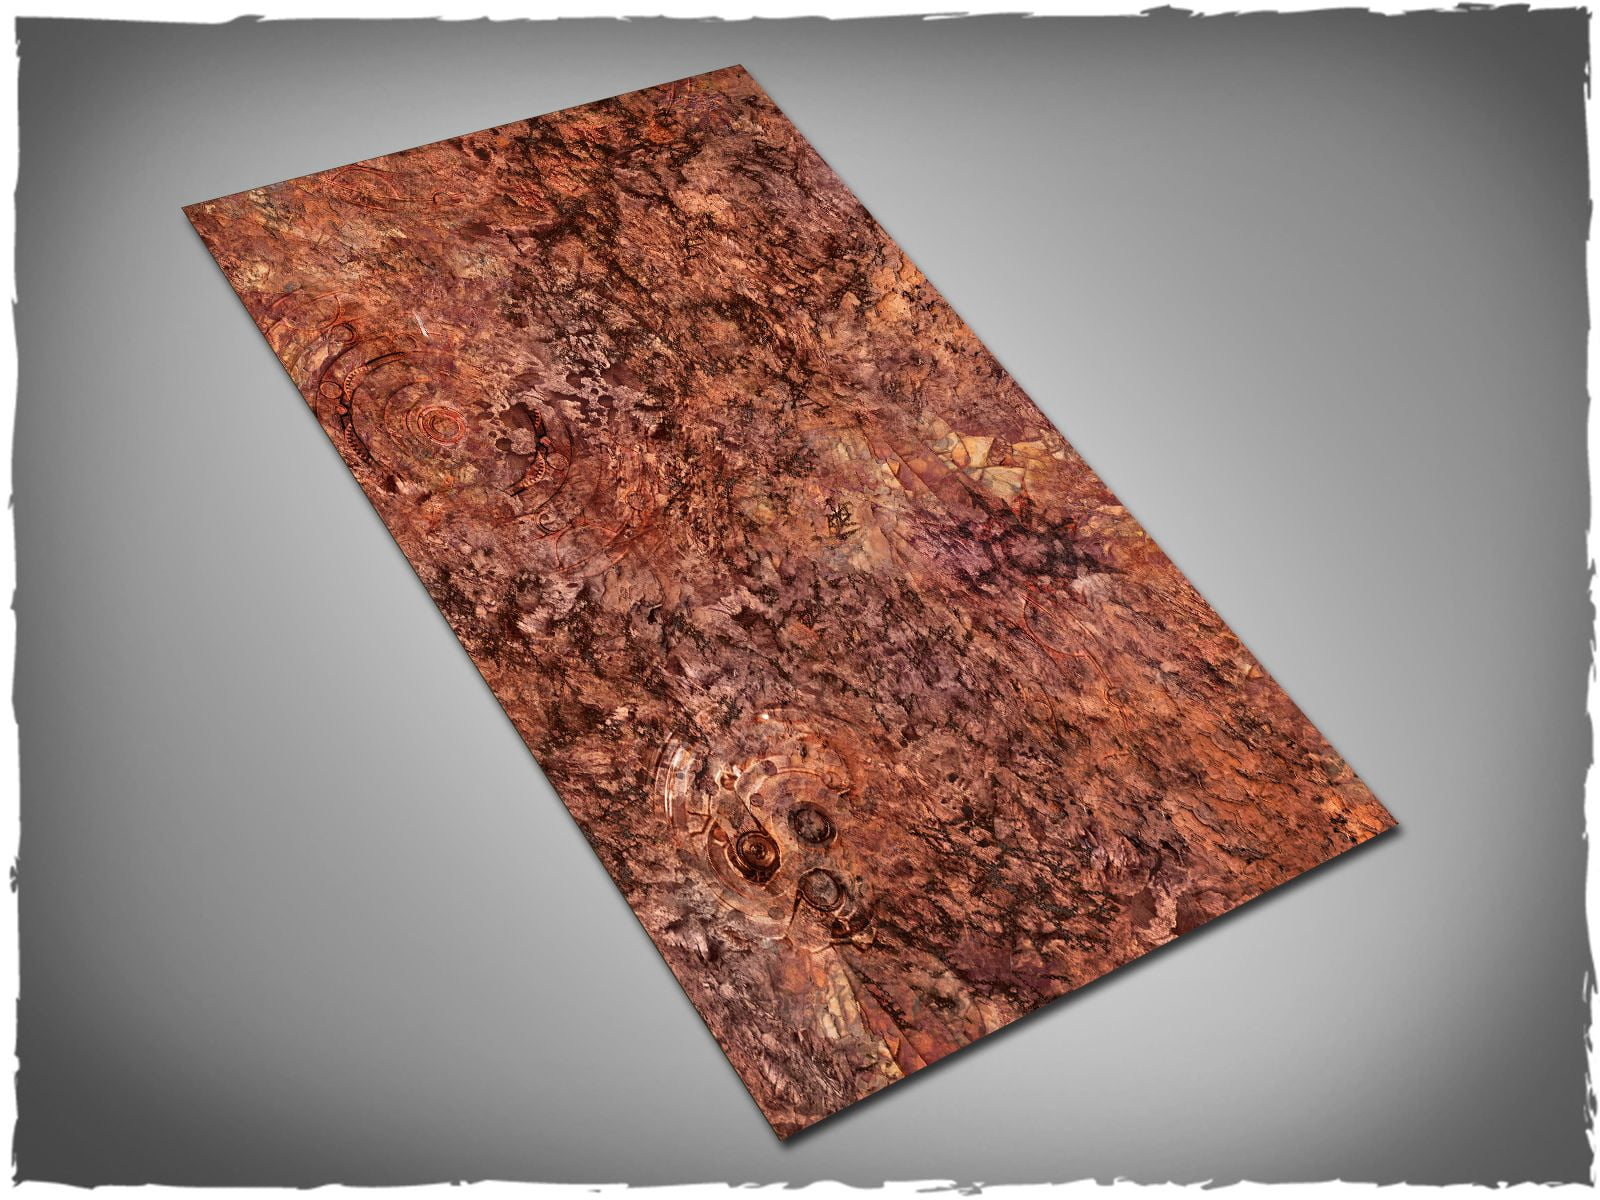 44in x 30in, Realm of Chaos Themed PVC Games Mat